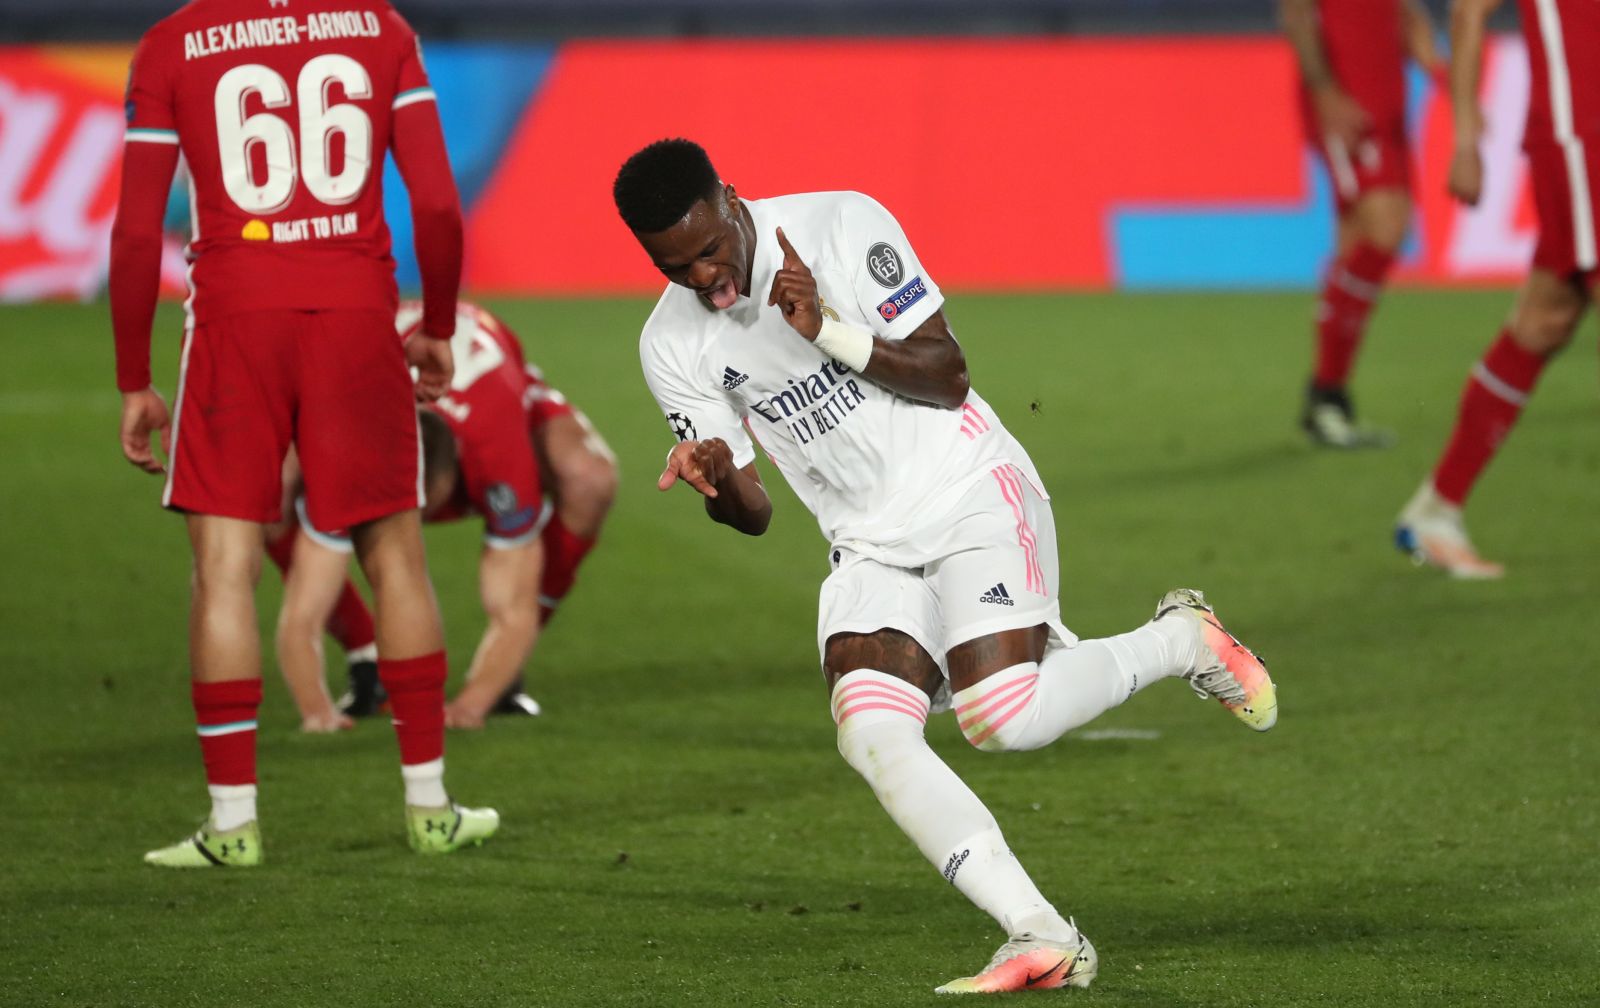 epa09119377 Real Madrid's striker Vinicius Jr celebrates after scoring the 3-1 goal during the UEFA Champions League quarter final first leg soccer match between Real Madrid and Liverpool FC held at Alfredo Di Stefano stadium, in Madrid, central Spain, 06 April 2021.  EPA/Kiko Huesca